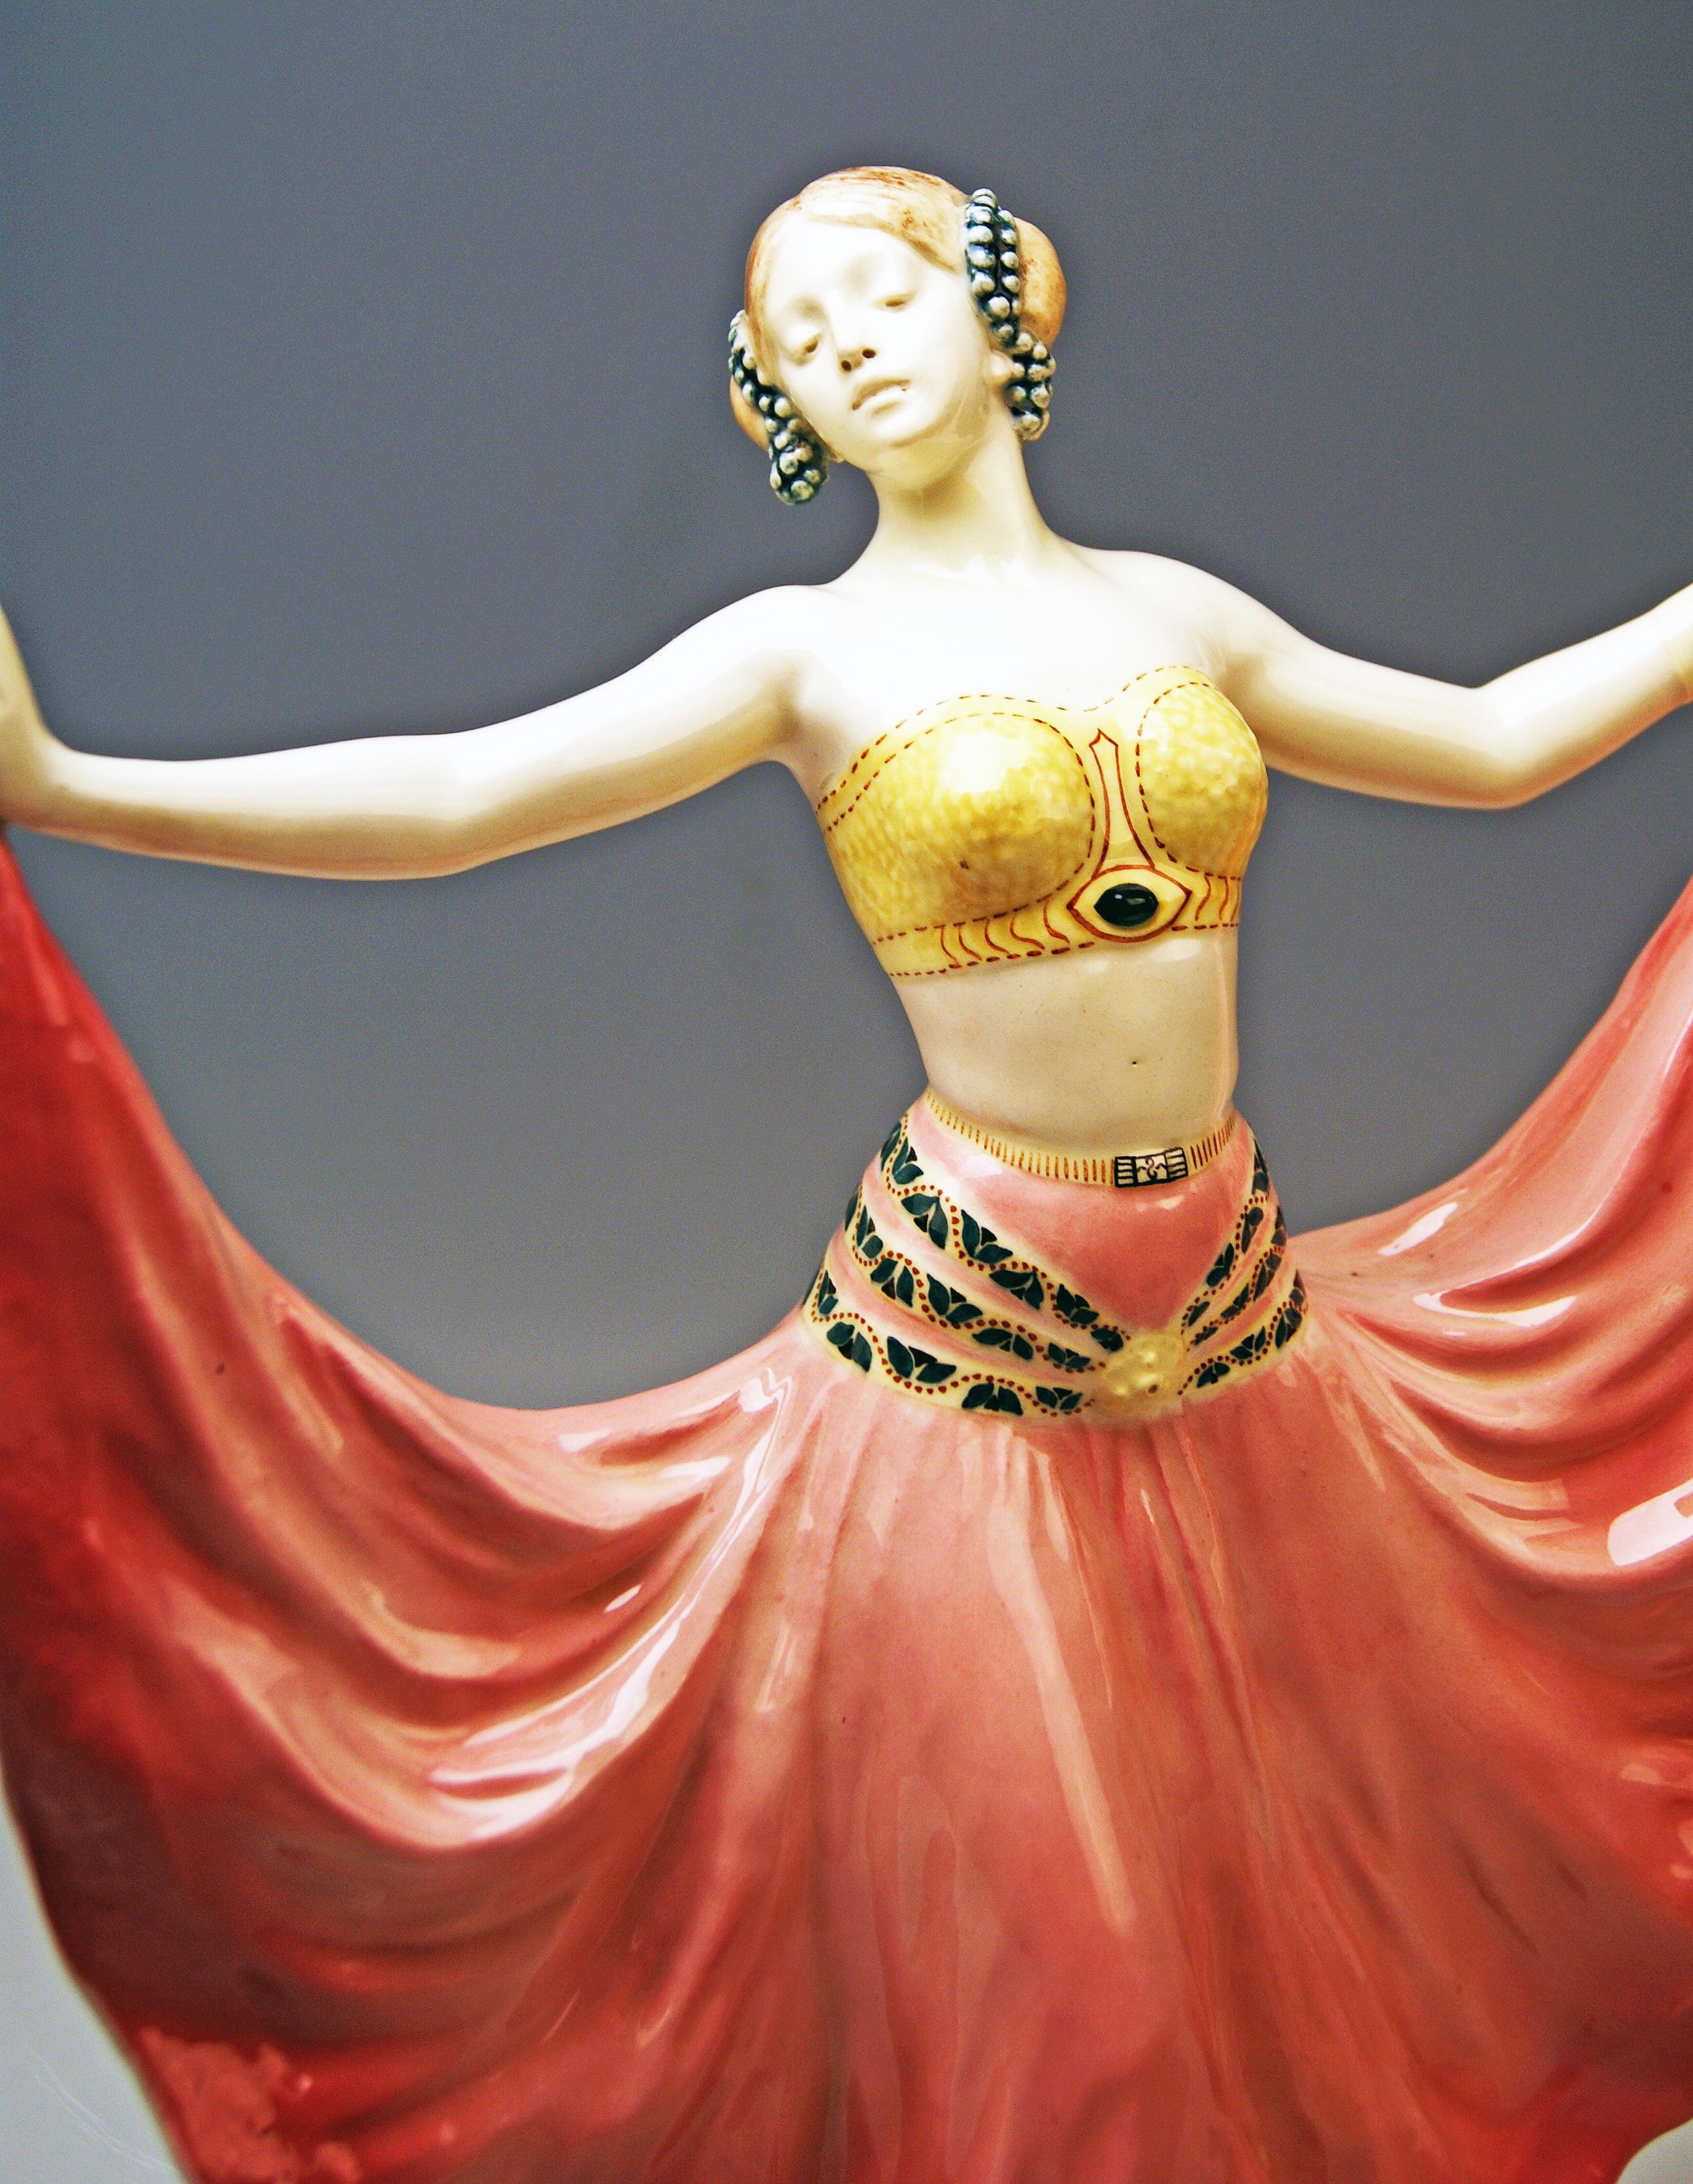 Hand-Painted Goldscheider Vienna Lady Dancer Ruth, Rosé Model 4141 Early Made circa 1912-1913